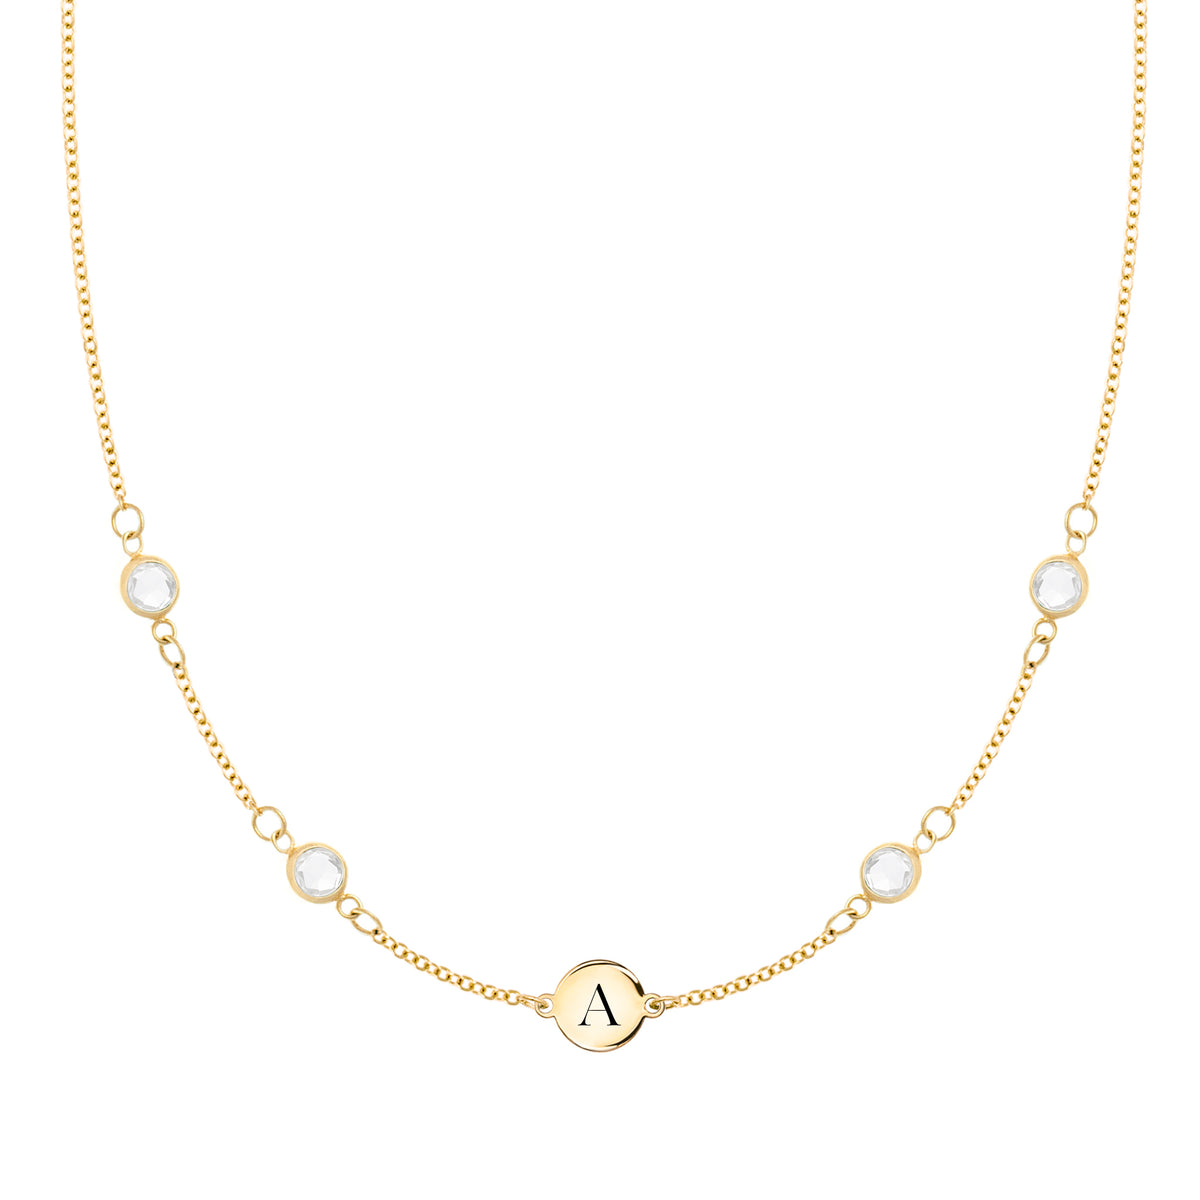 Explore Our 14k Gold Birthstone Bouquet Necklace 4 Stone - J.H. Breakell  and Co.